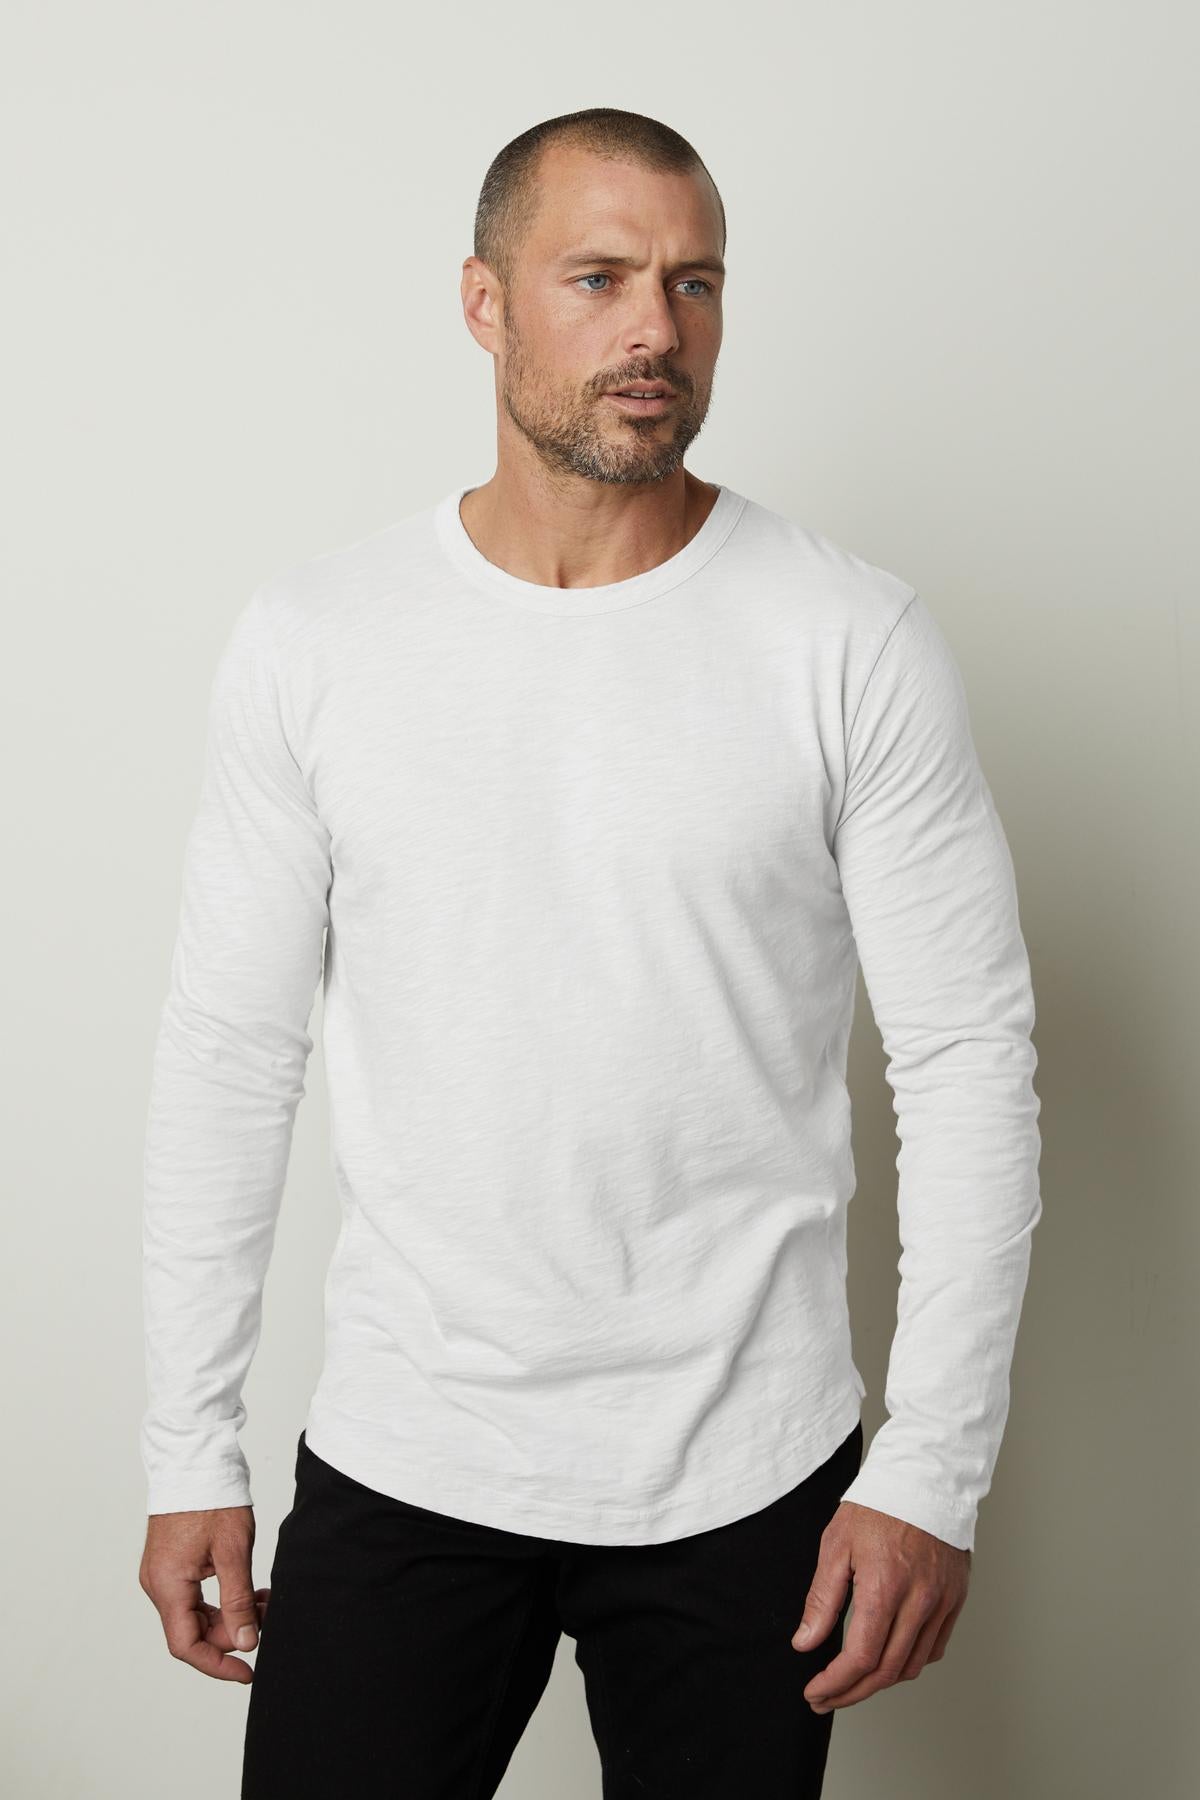 A man wearing a flawless fit white long sleeve KAI CREW NECK TEE by Velvet by Graham & Spencer, the perfect layering piece.-35855337521345